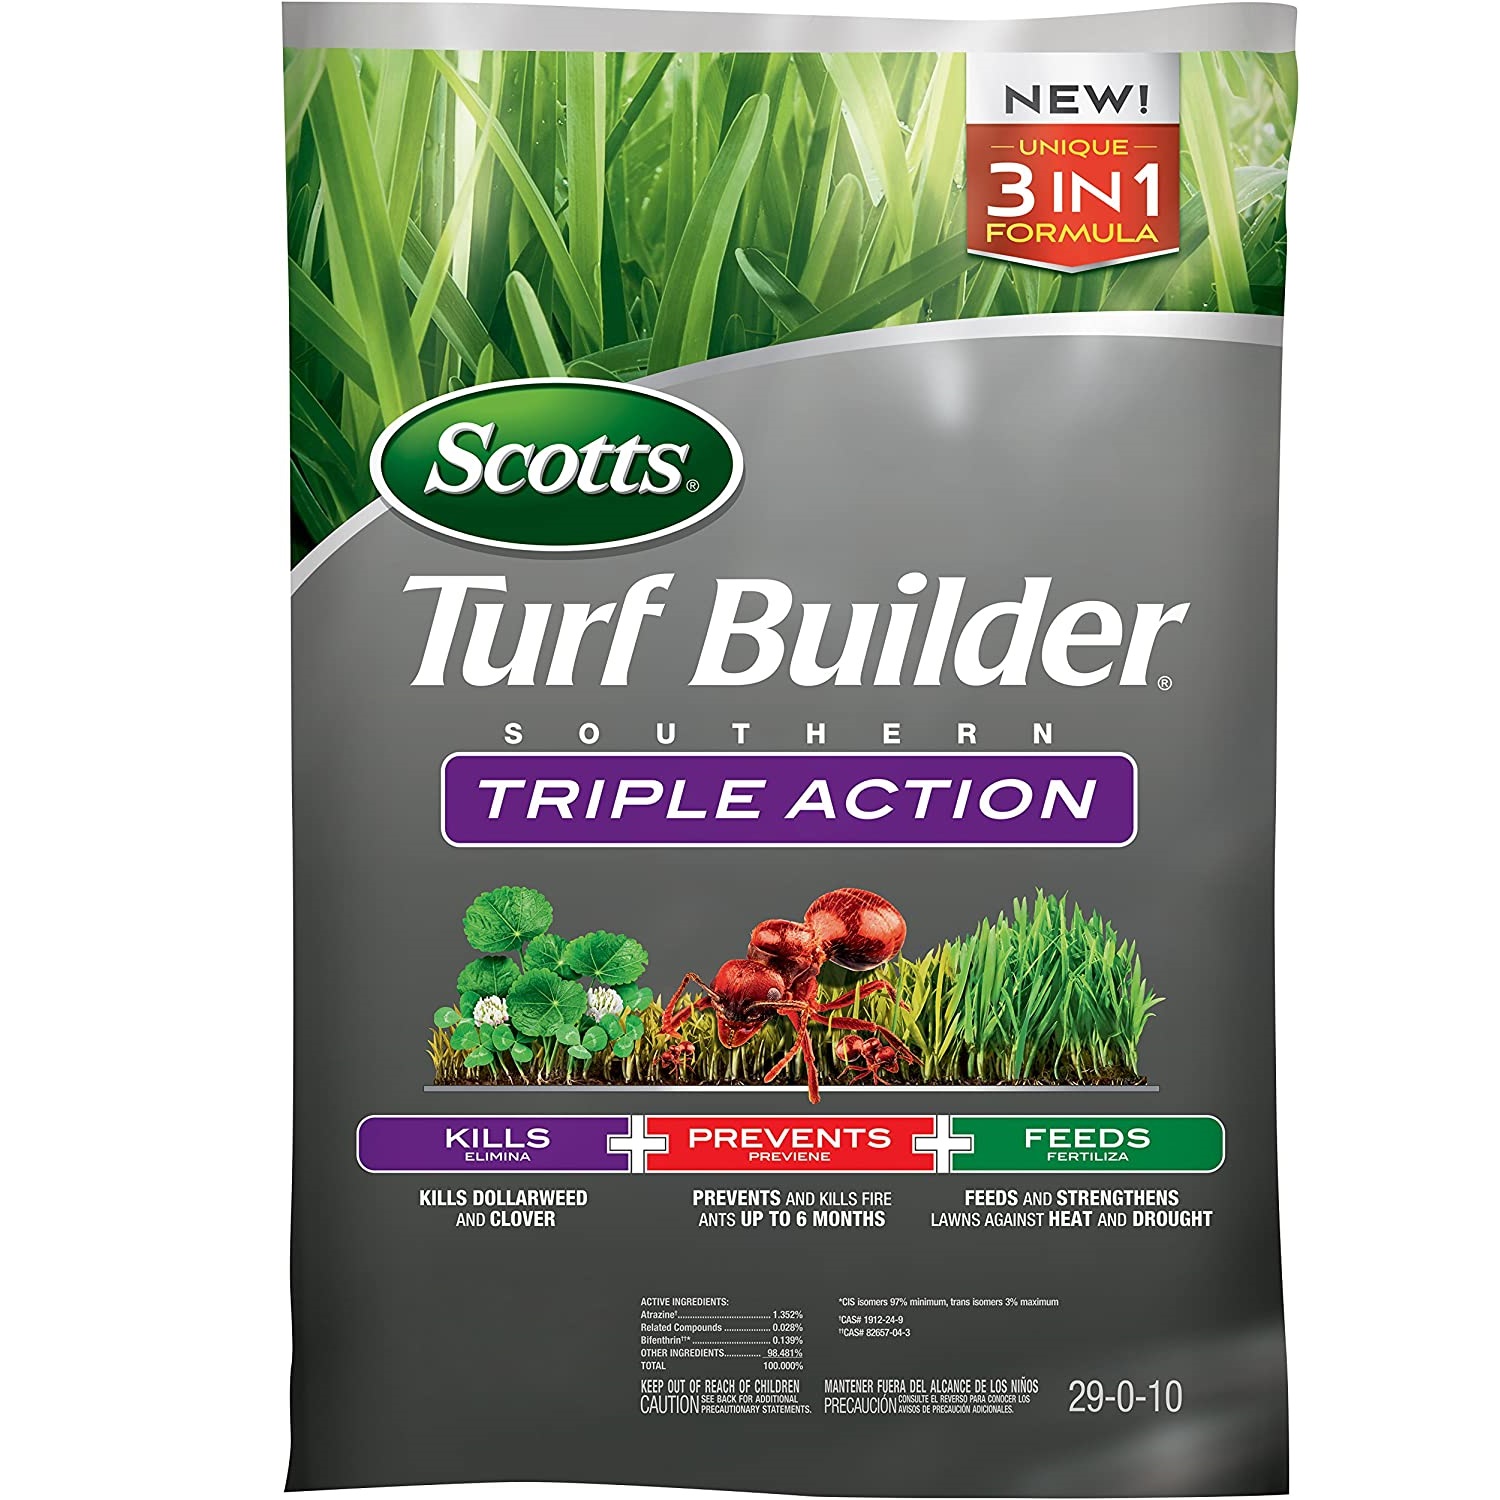 Top 5 Best Fertilizers for St. Augustine Grass [2021 Review]